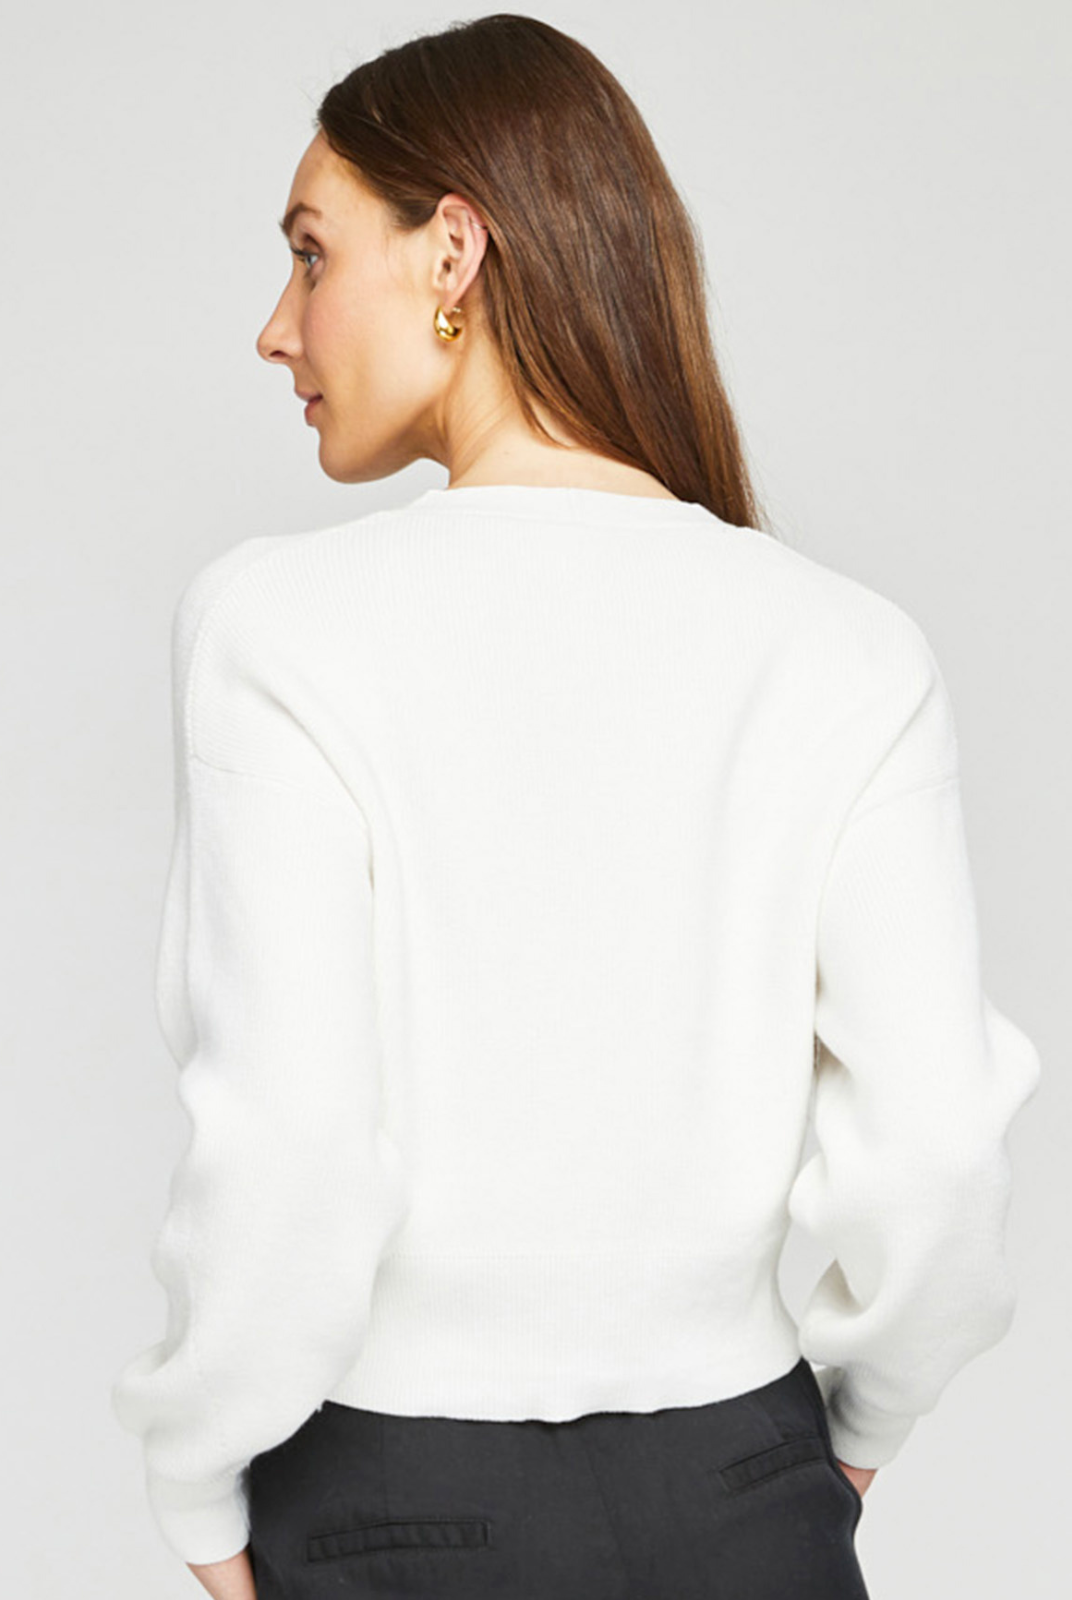 Gentle Fawn Orville Sweater - White. The Orville cardigan is made of a super soft heathered yarn. Wear it as is or layered over a tank for an effortless look.